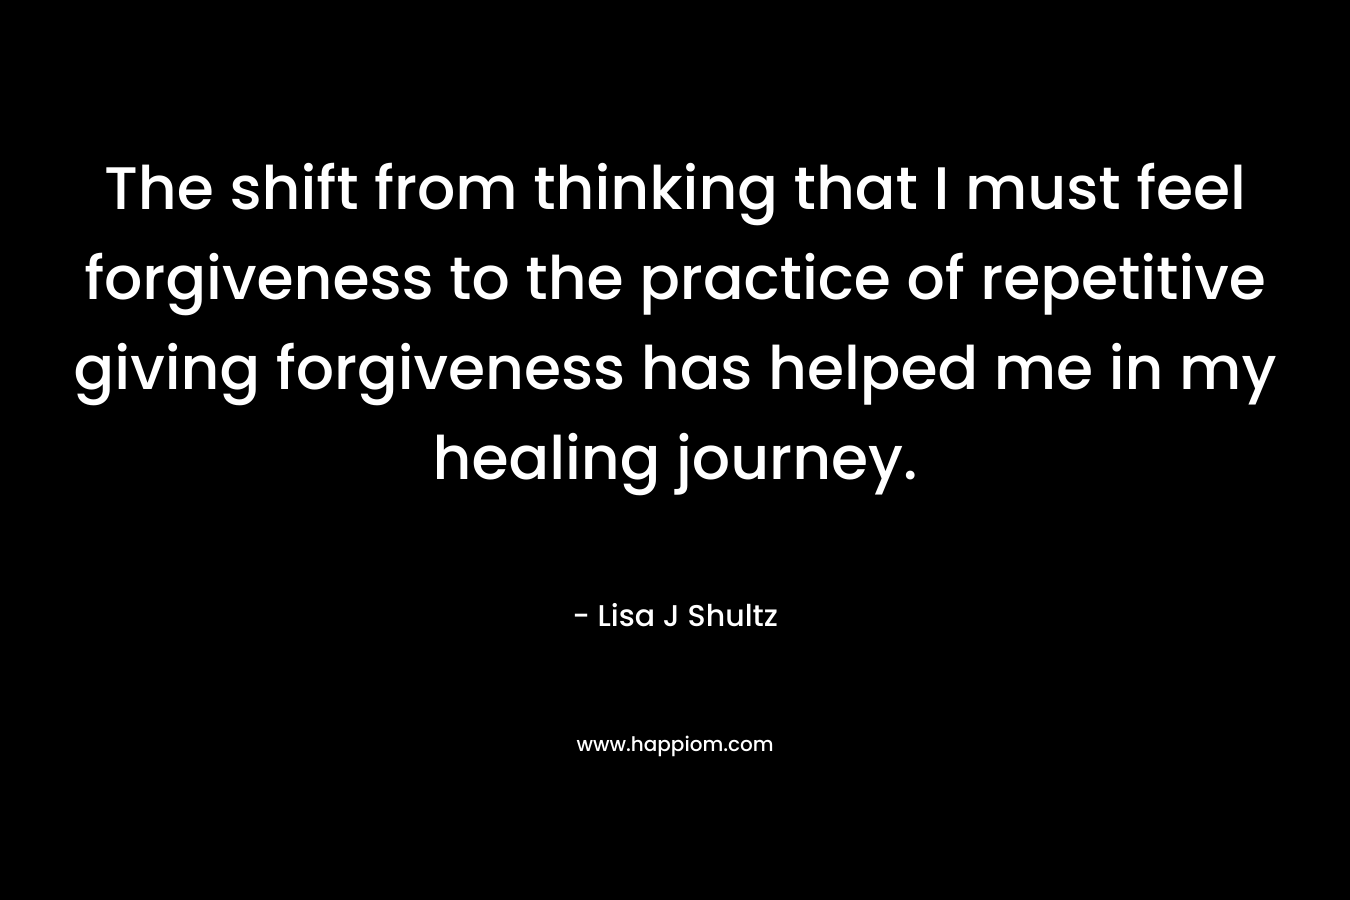 The shift from thinking that I must feel forgiveness to the practice of repetitive giving forgiveness has helped me in my healing journey.